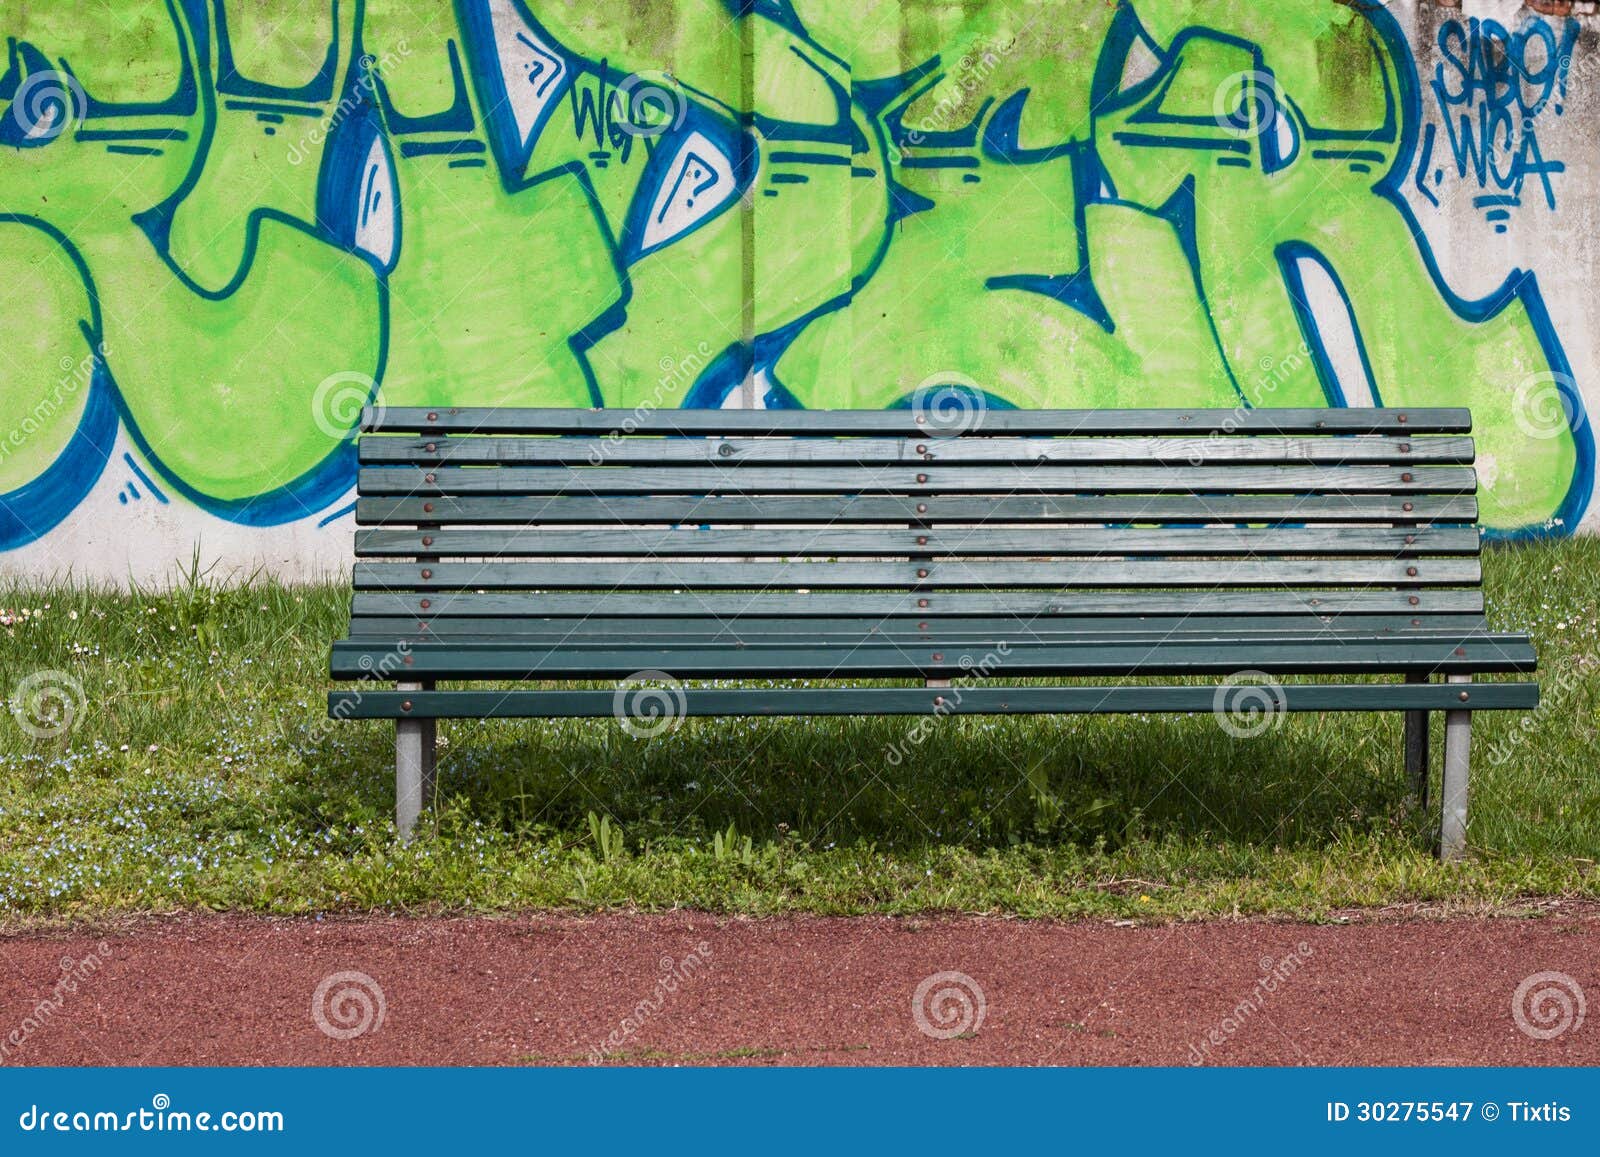 Green Bench With Graffiti On The Background Editorial Photography Image Of Graffiti